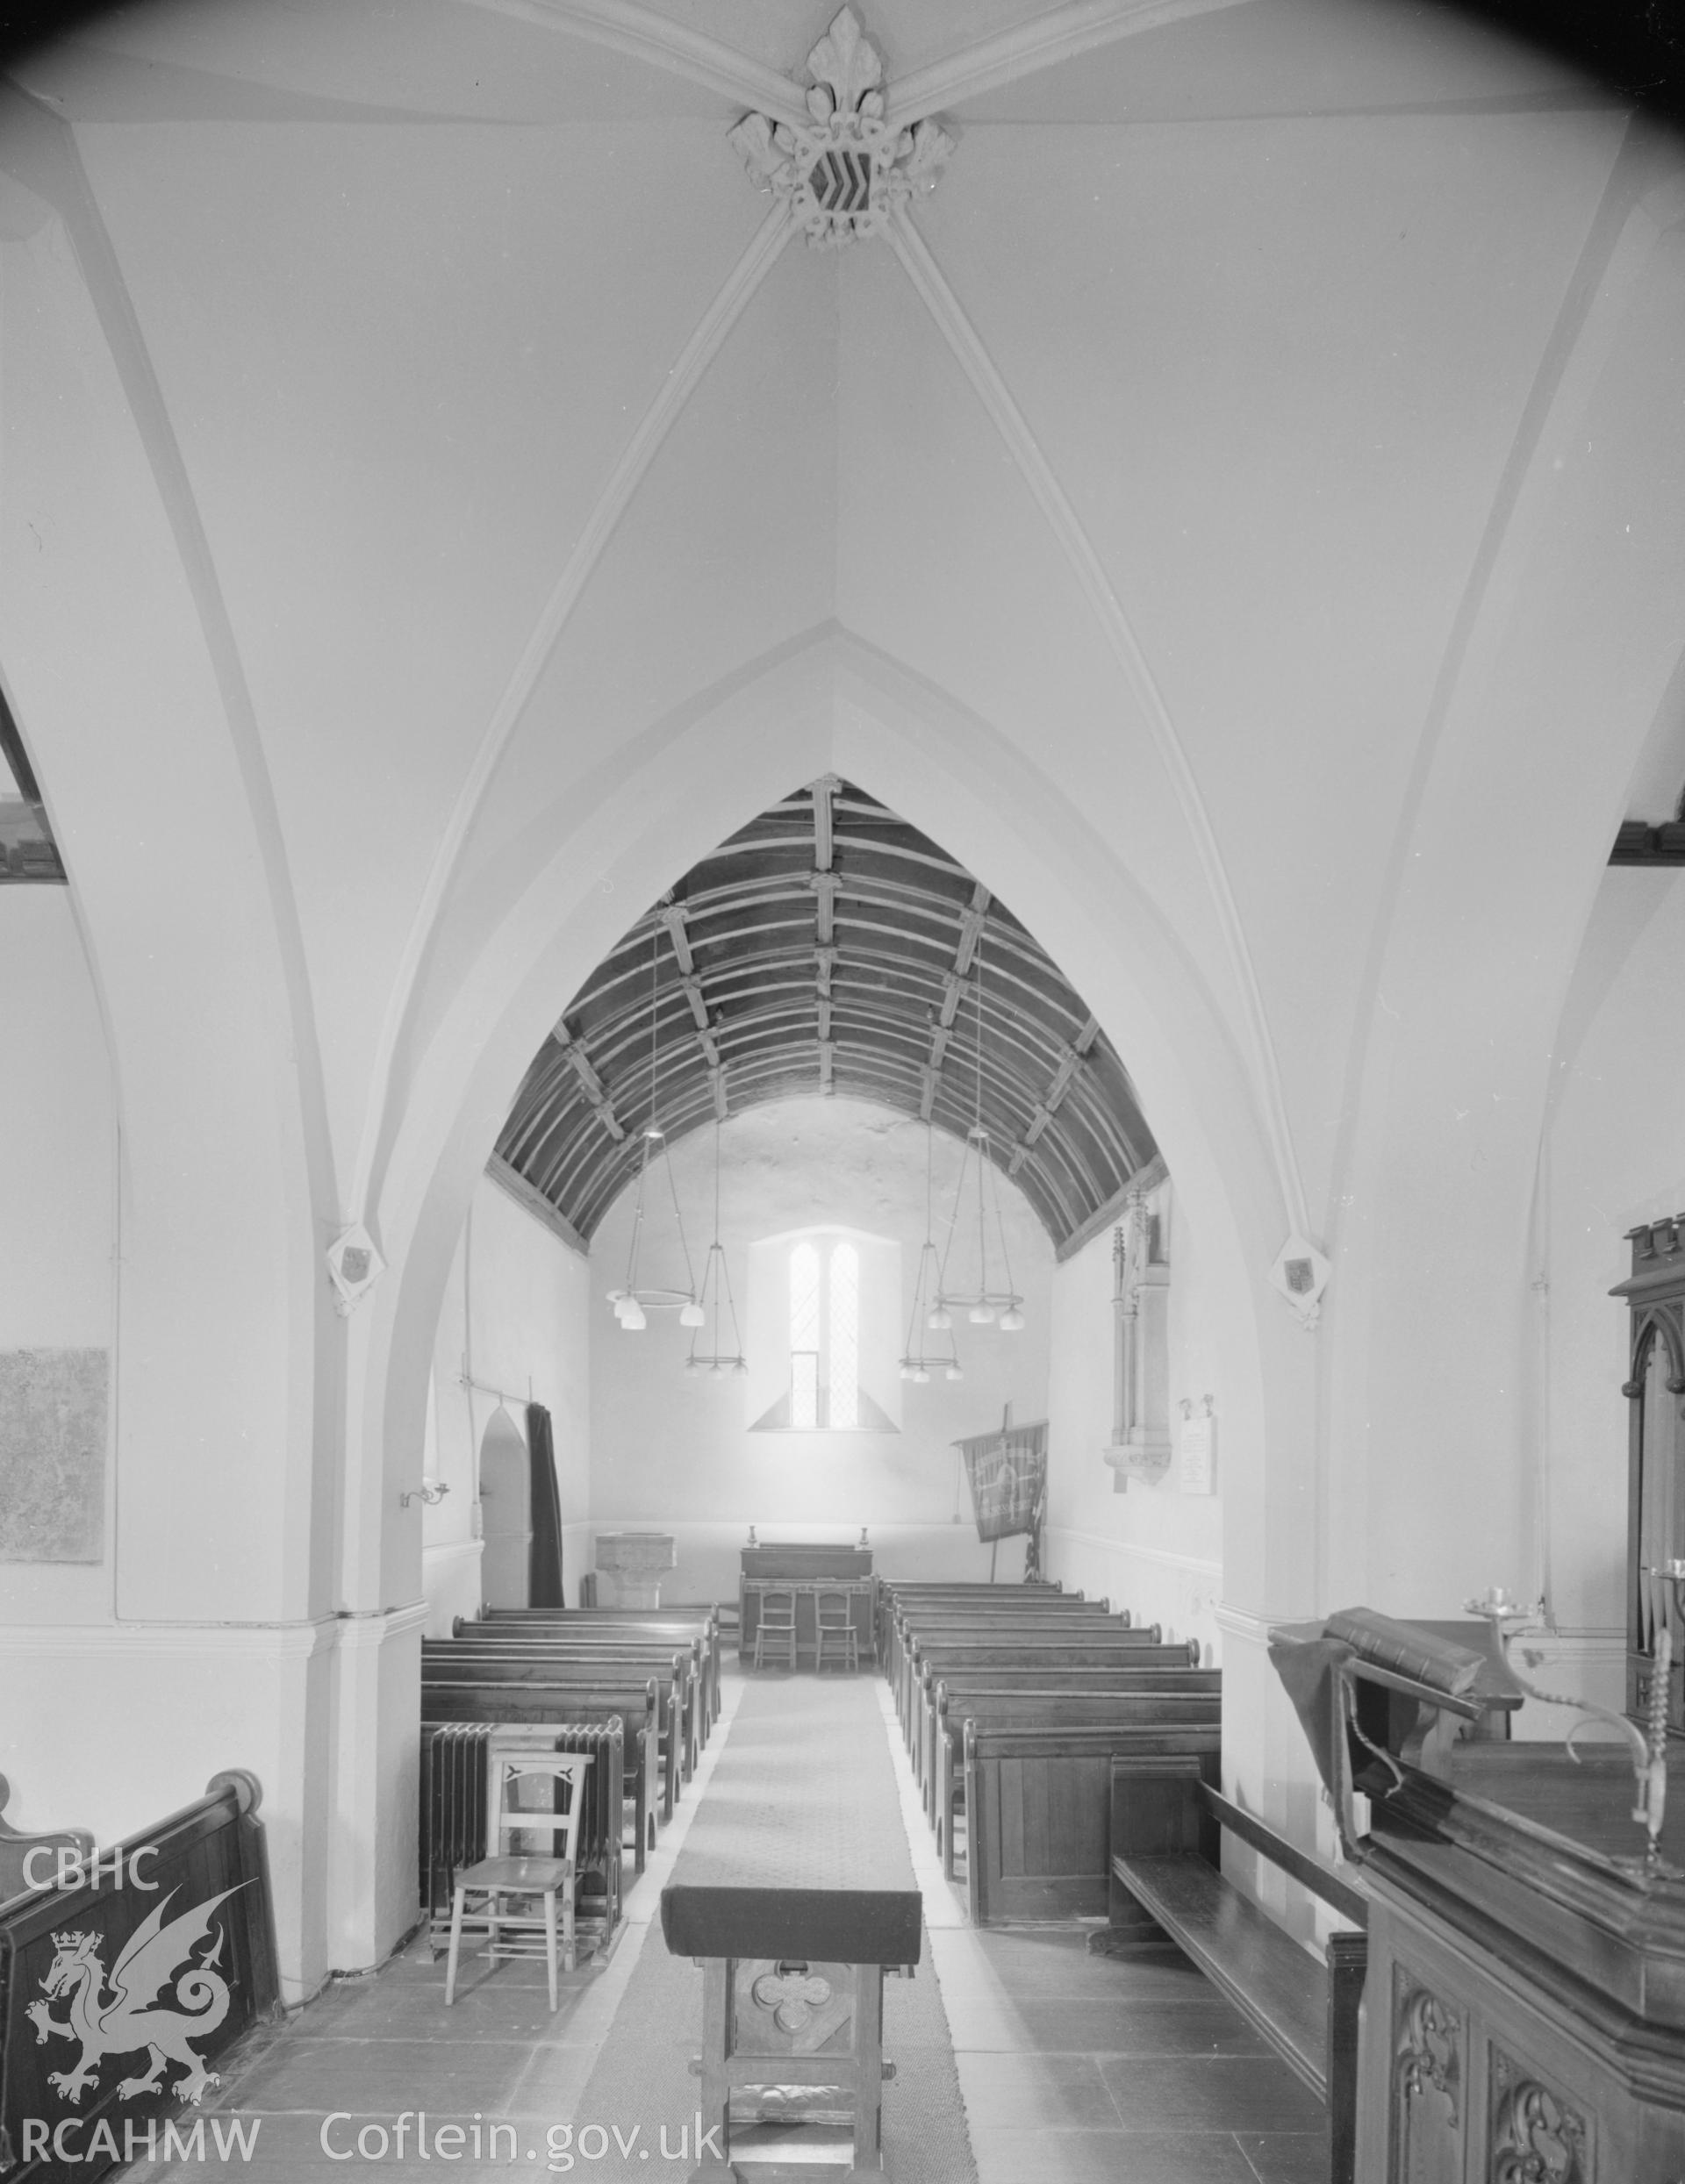 Interior view of St George's Church facing west,  taken 25.06.65.